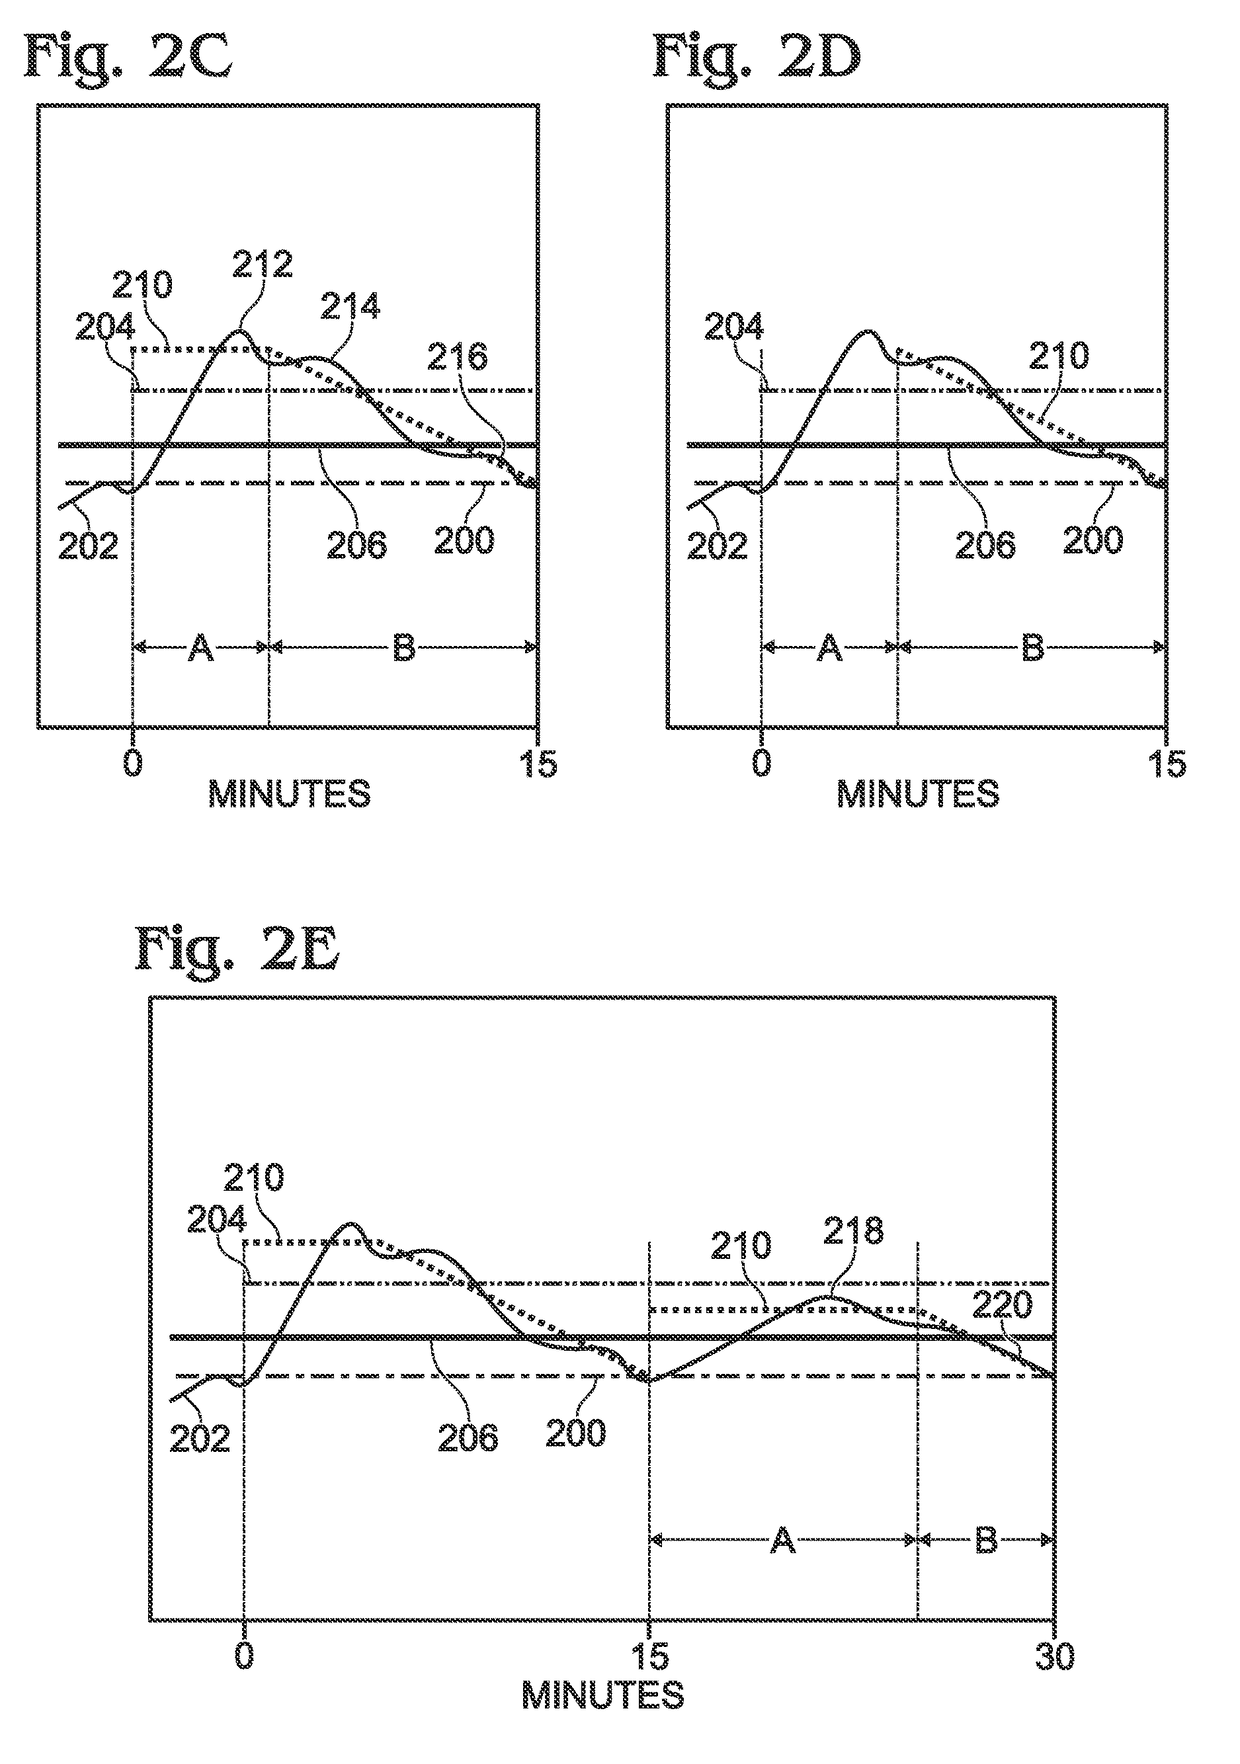 System and method for managing AC power using auxiliary DC-to-AC inversion